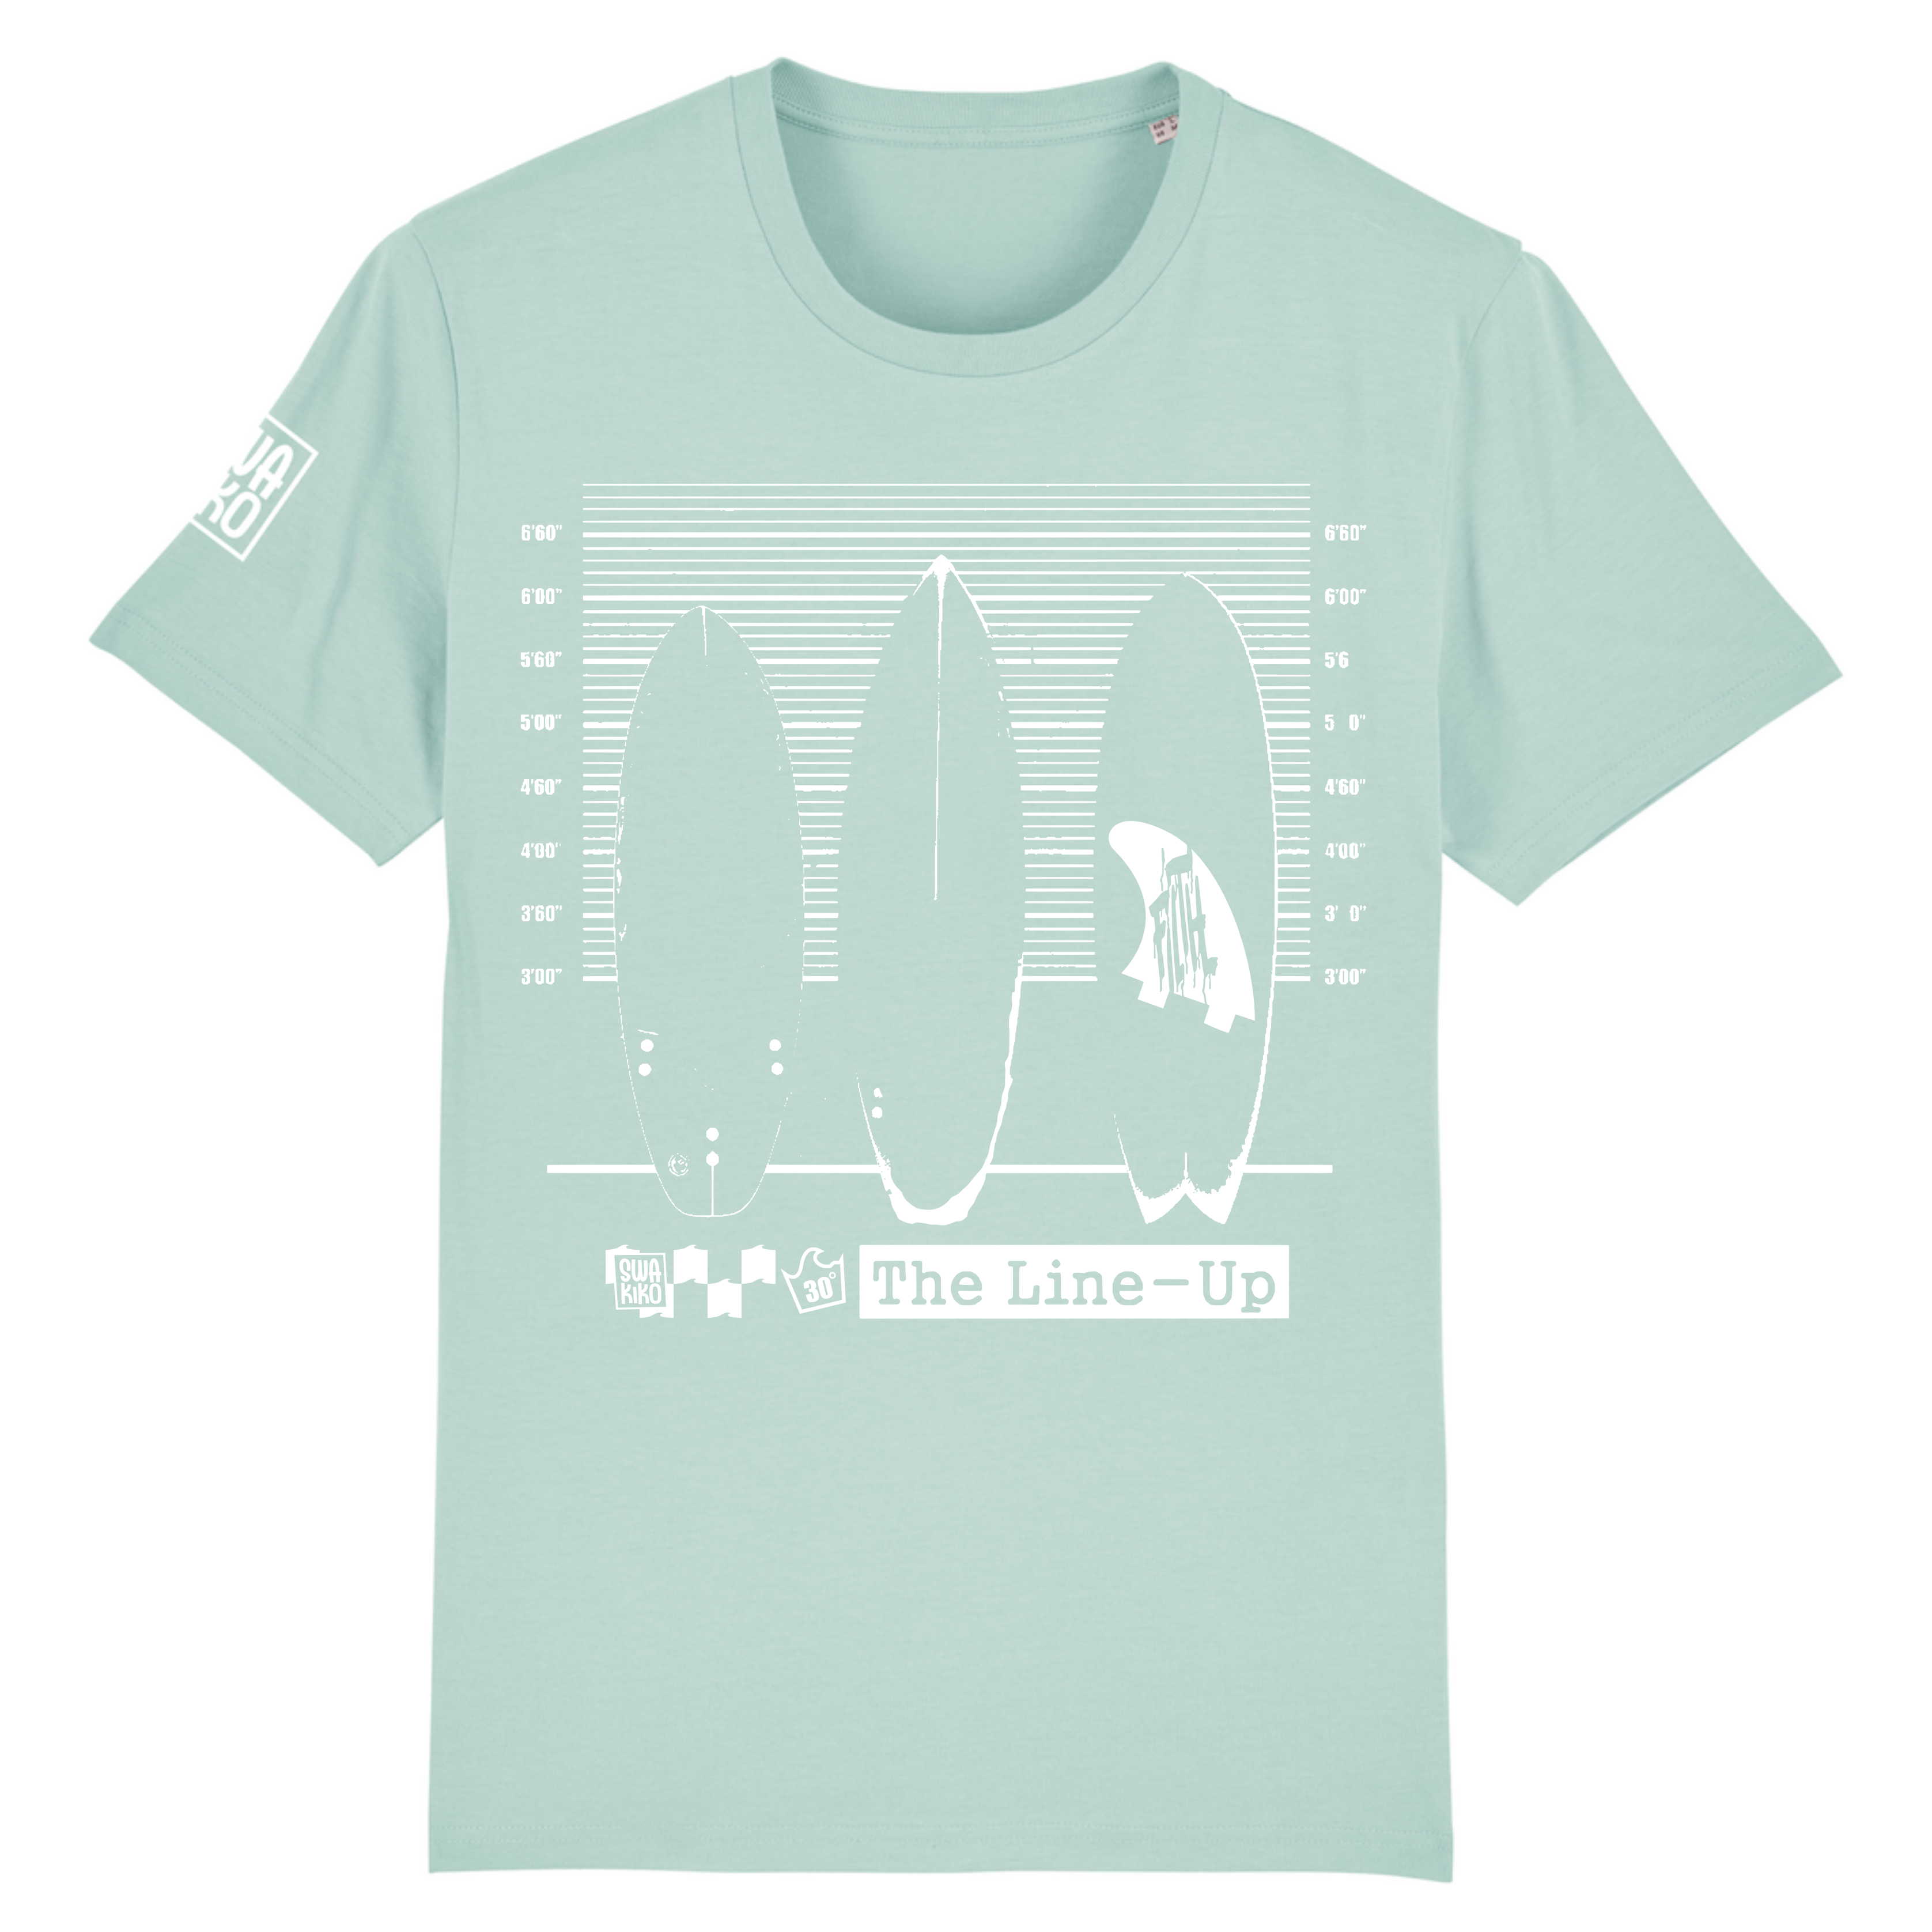 Surf t-shirt men turquoise, The line-up